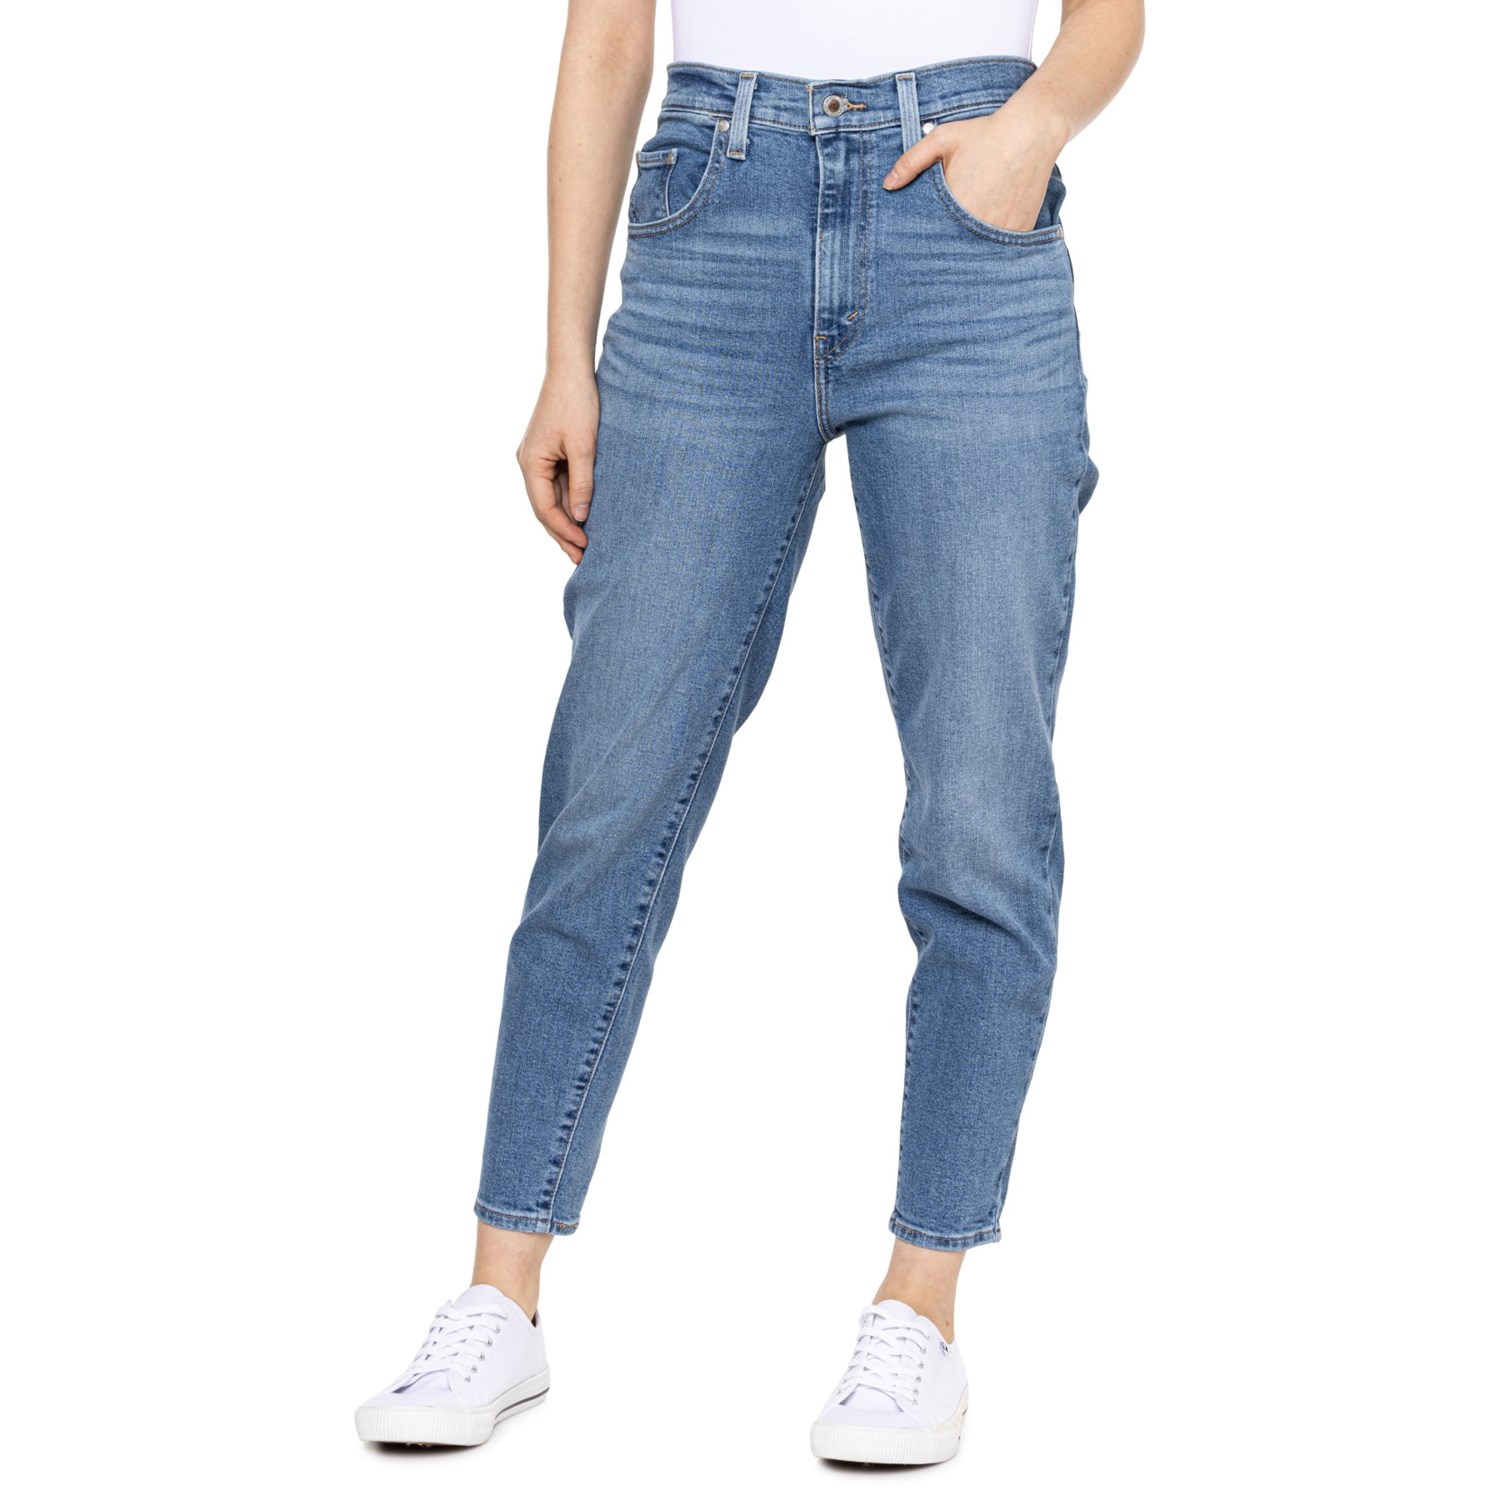 Levi's SilverTab Mom Jeans - High Rise - Save 74%